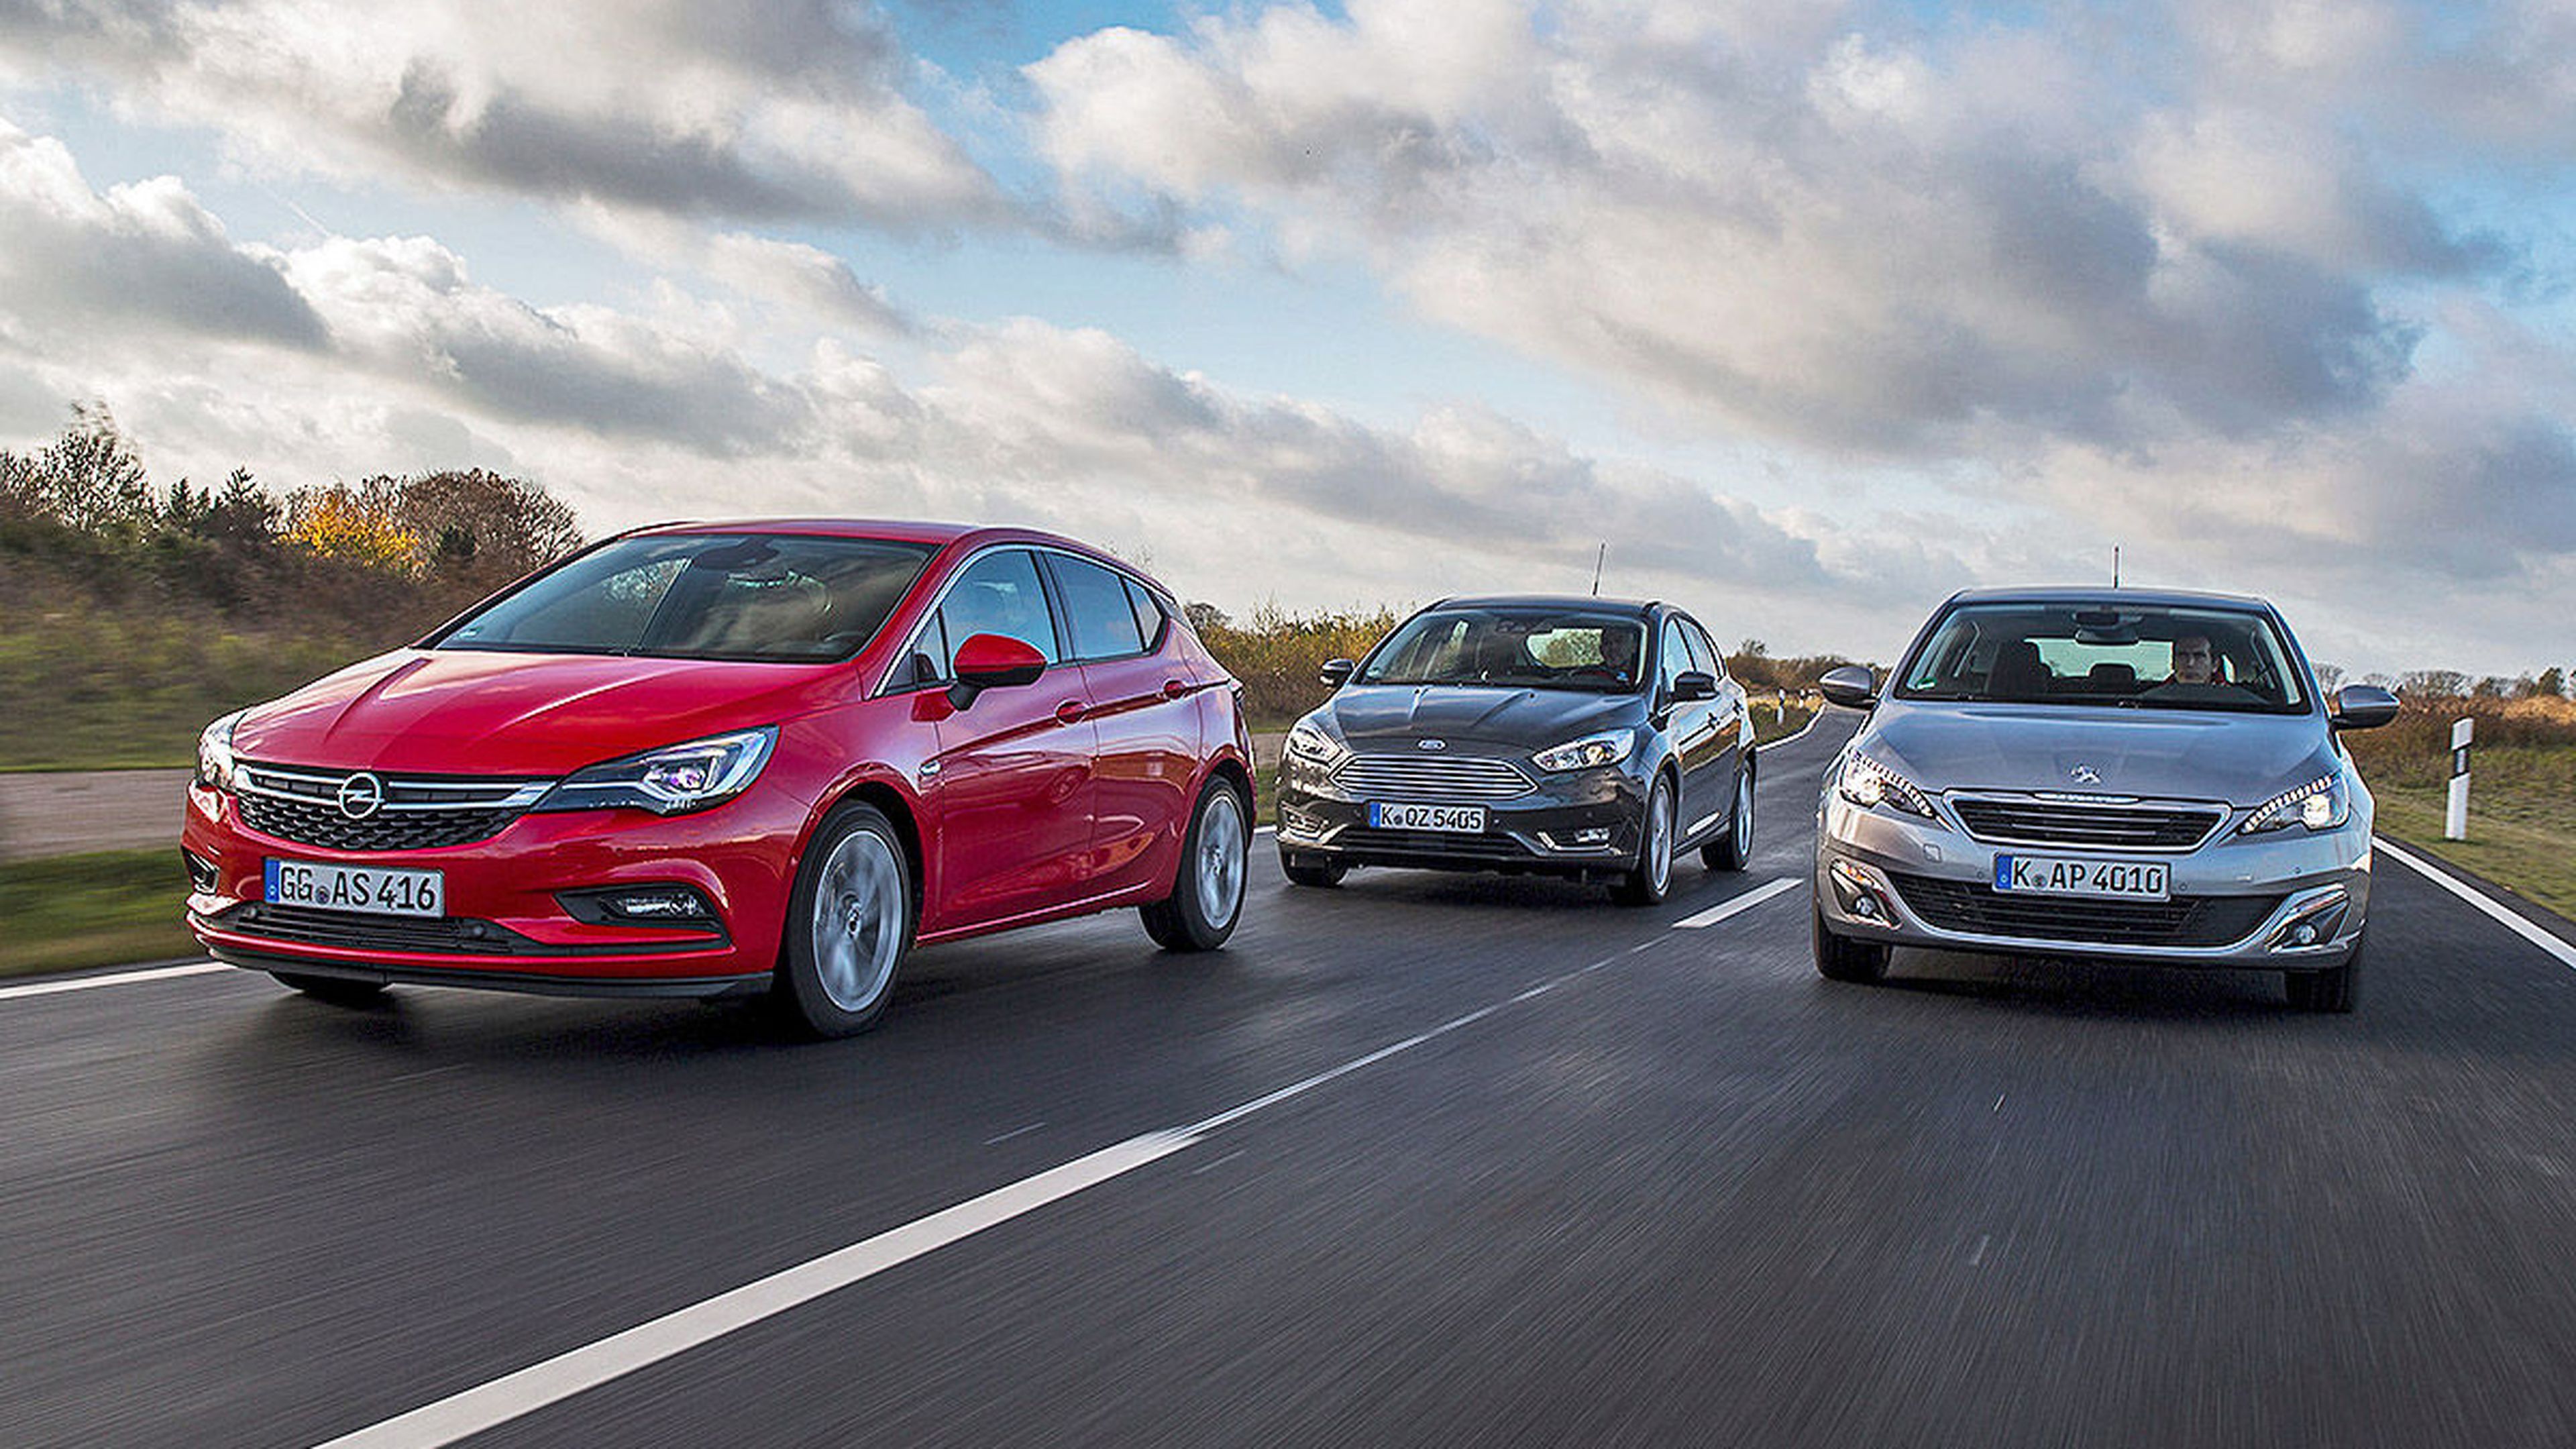 Comparativa 3 cilindros: Opel Astra/Ford Focus/Peugeot 308